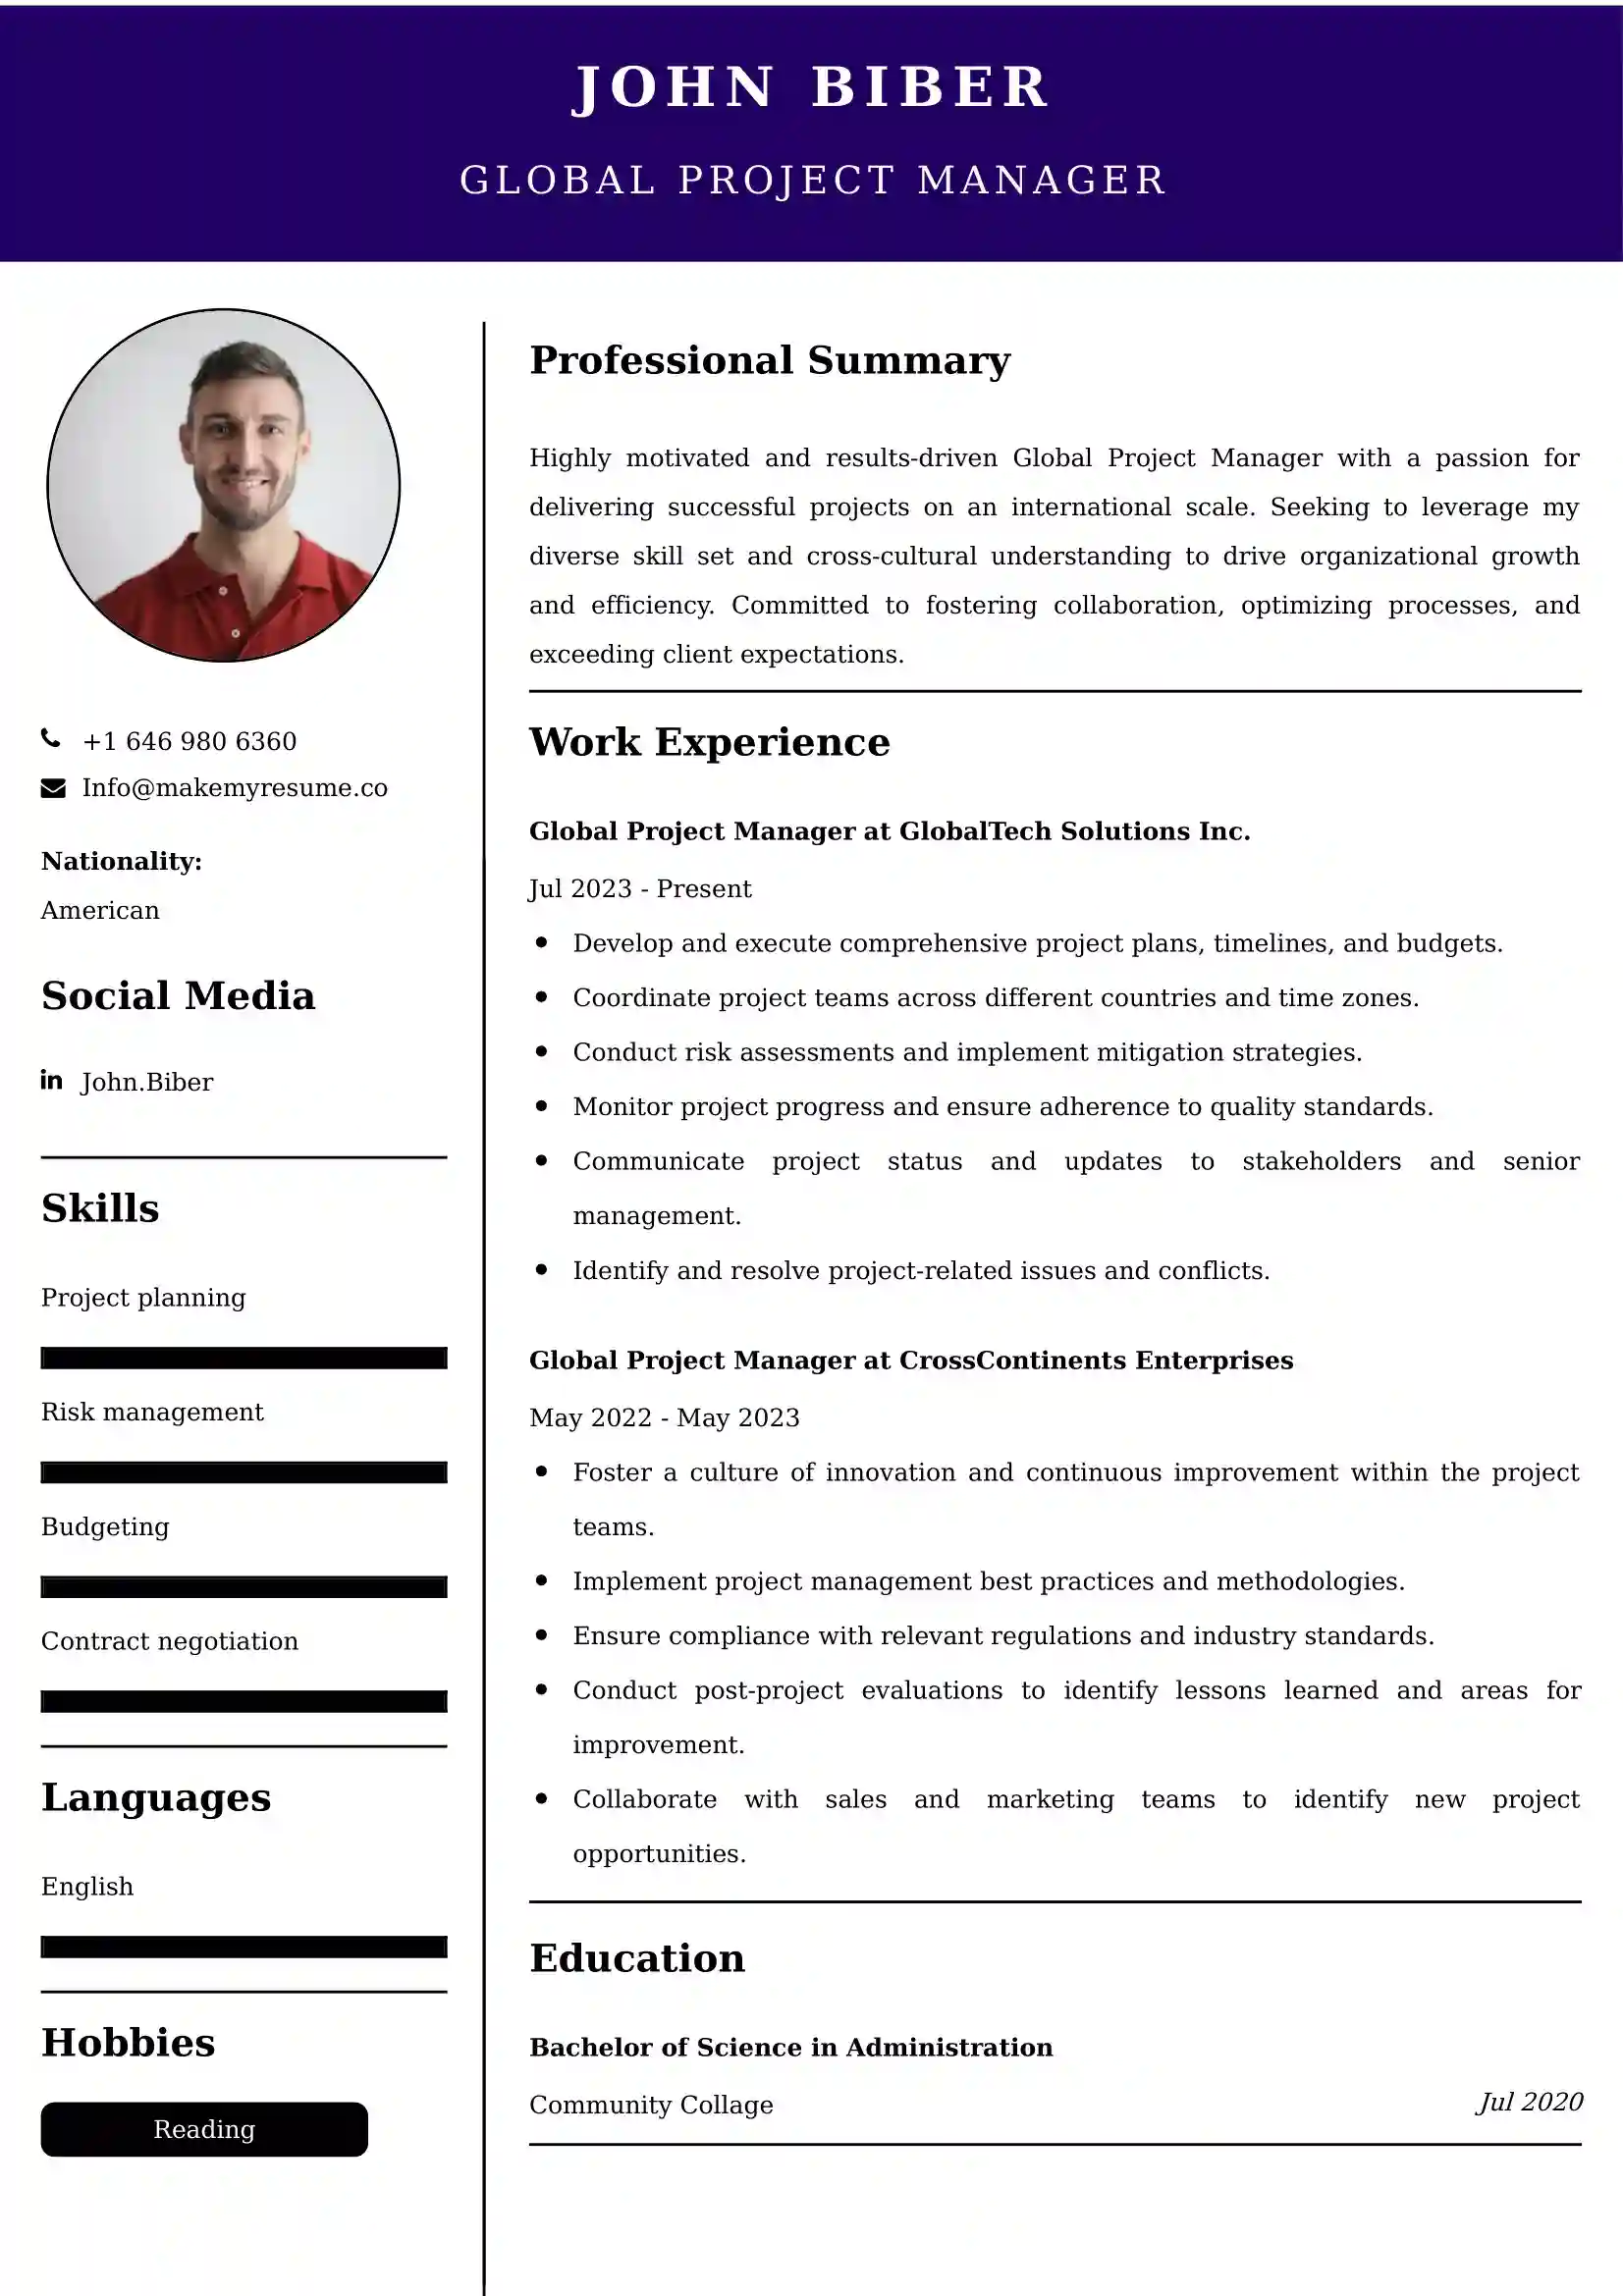 Global Project Manager Resume Examples - UK Format, Latest Template.